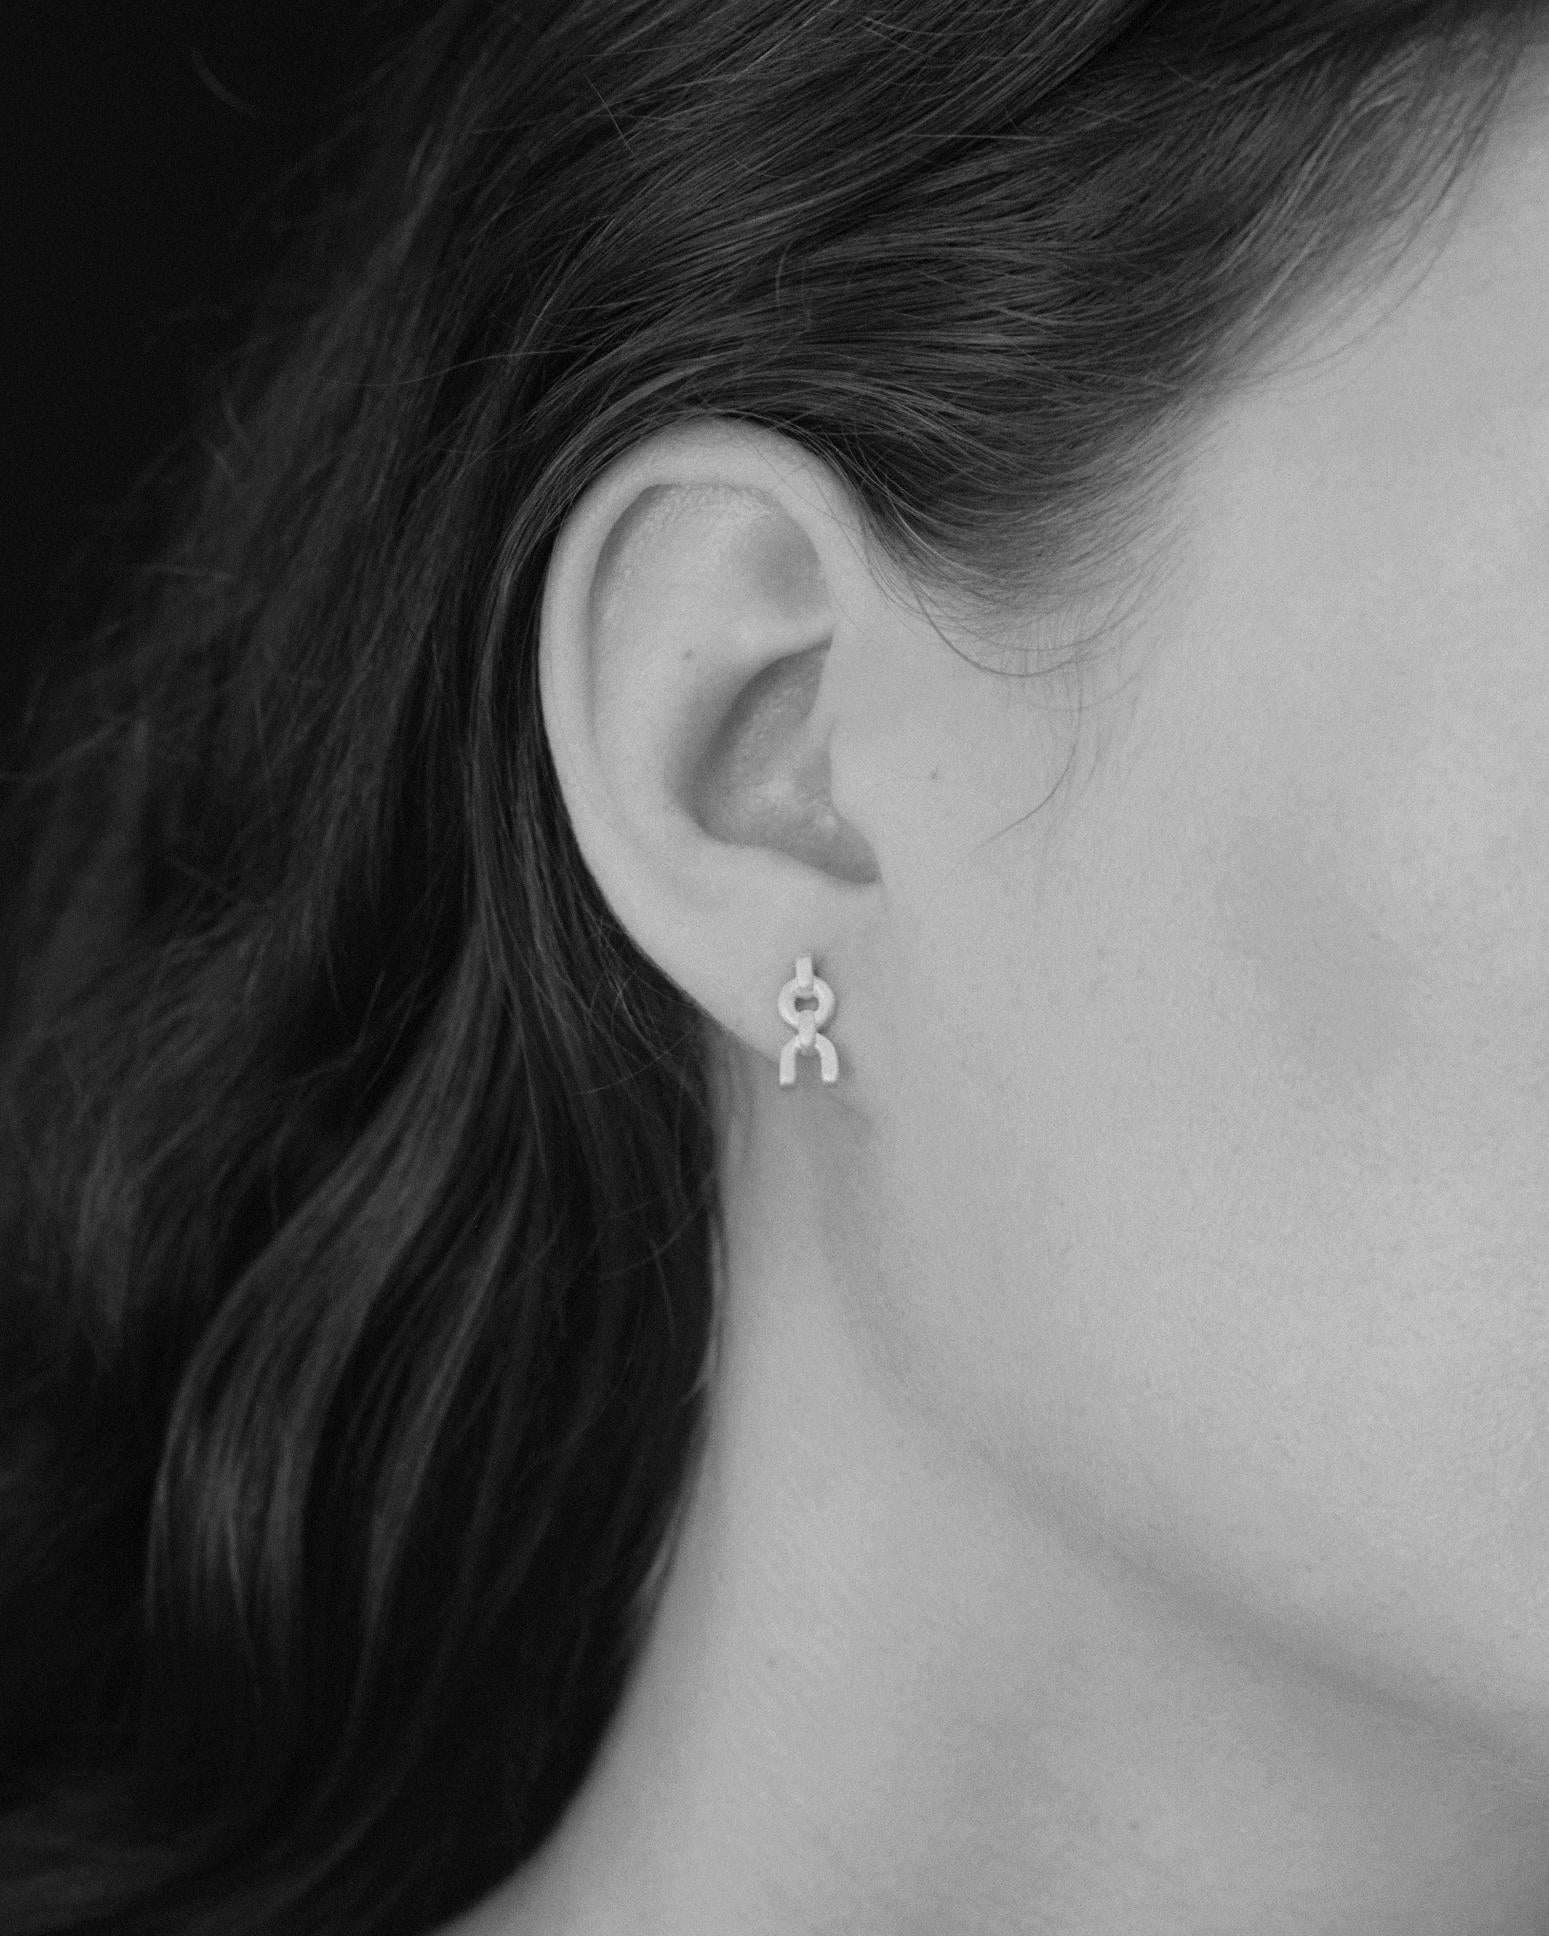 Referencing the durability and beauty of equine accoutrement, this is a symbolic element of Tiana Marie Combes' signature equestrian-inspired chain made in Los Angeles from recycled 14 karat white gold.

The Equestrian Chain Stud Earrings are a